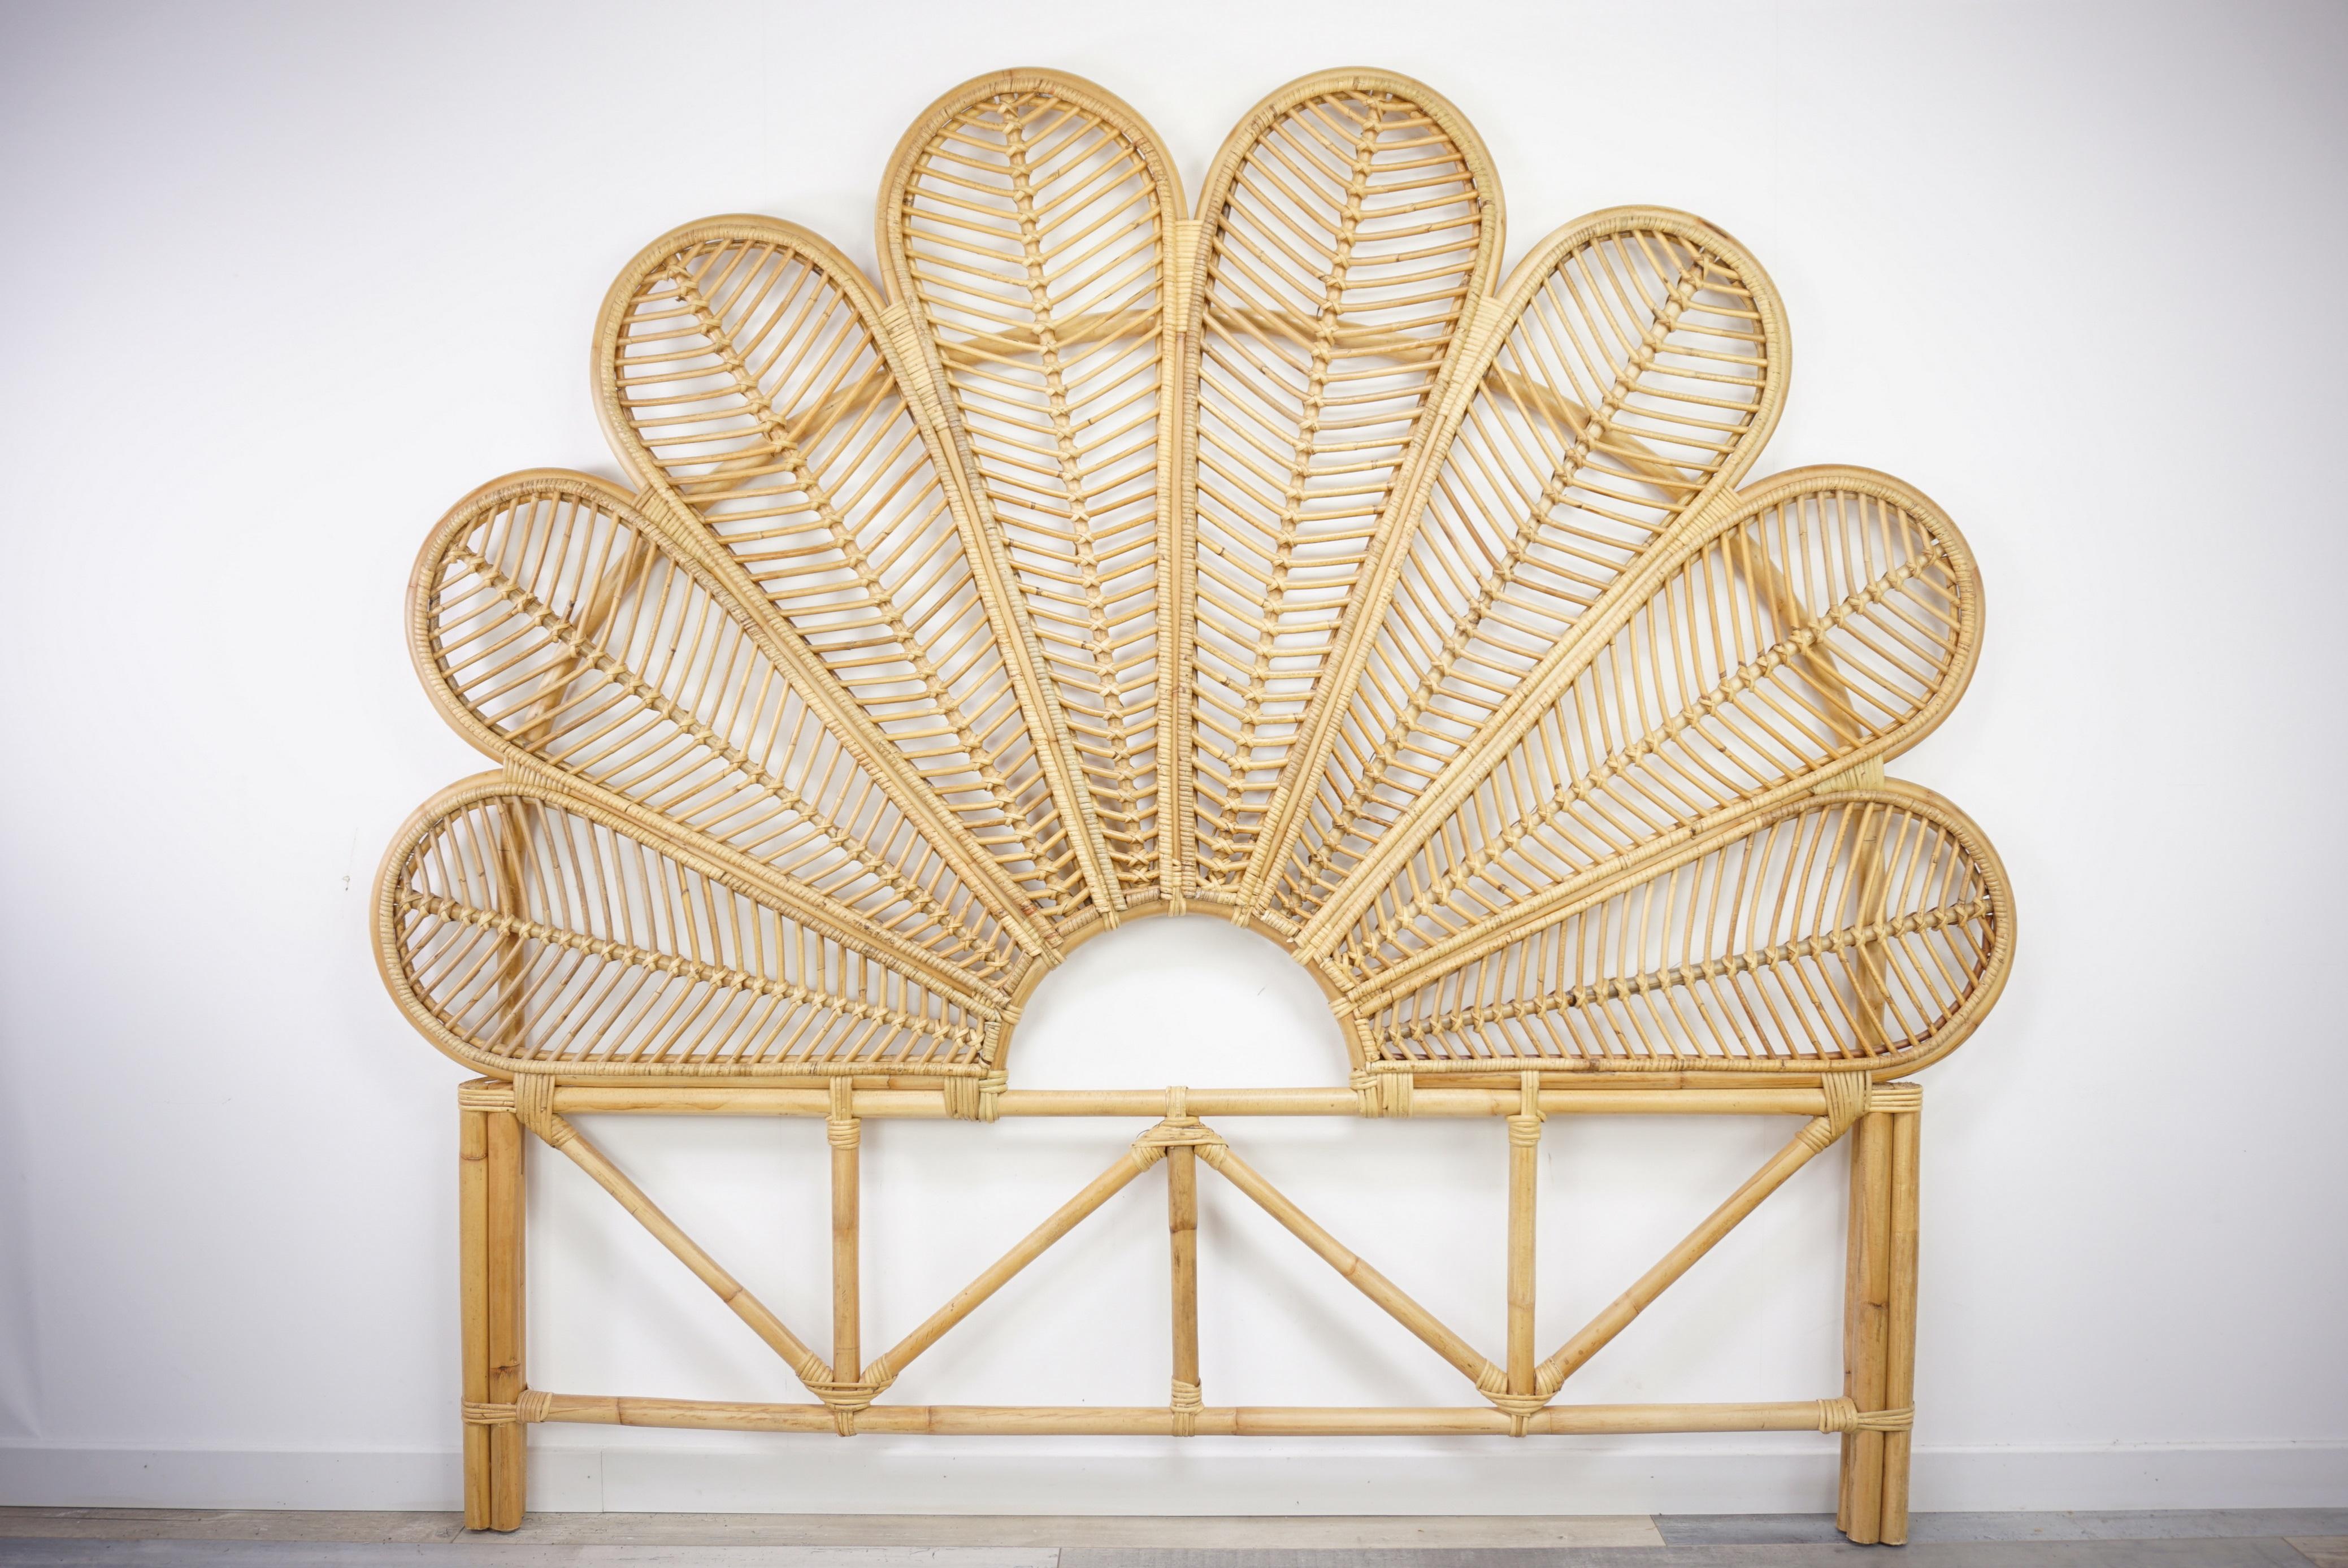 Rattan and wicker headboard for queen size bed.